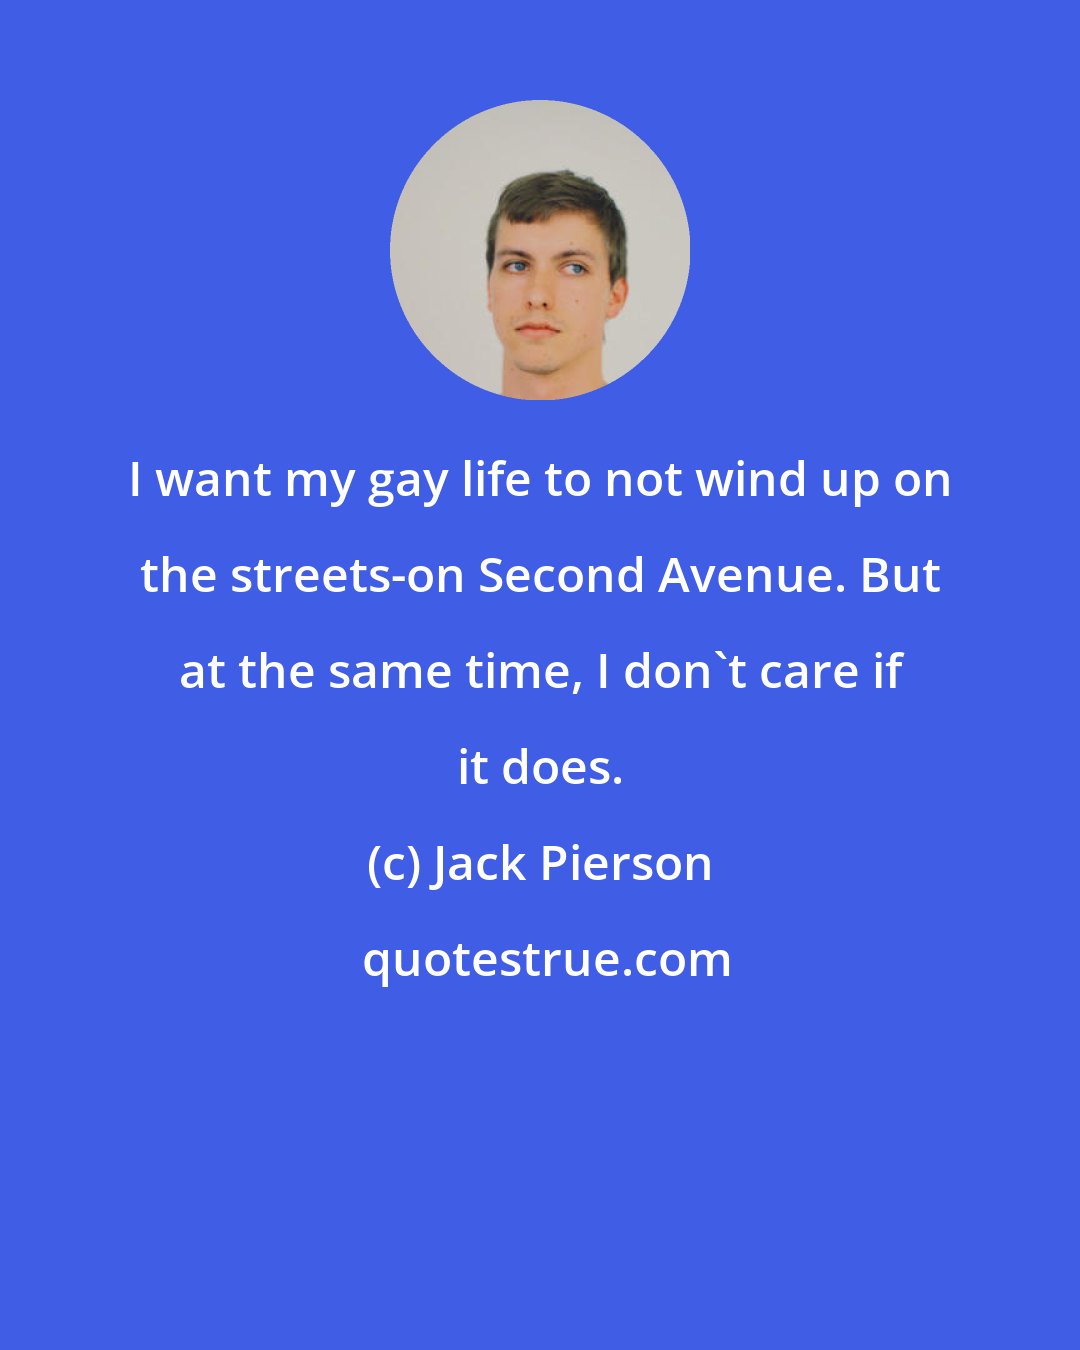 Jack Pierson: I want my gay life to not wind up on the streets-on Second Avenue. But at the same time, I don't care if it does.